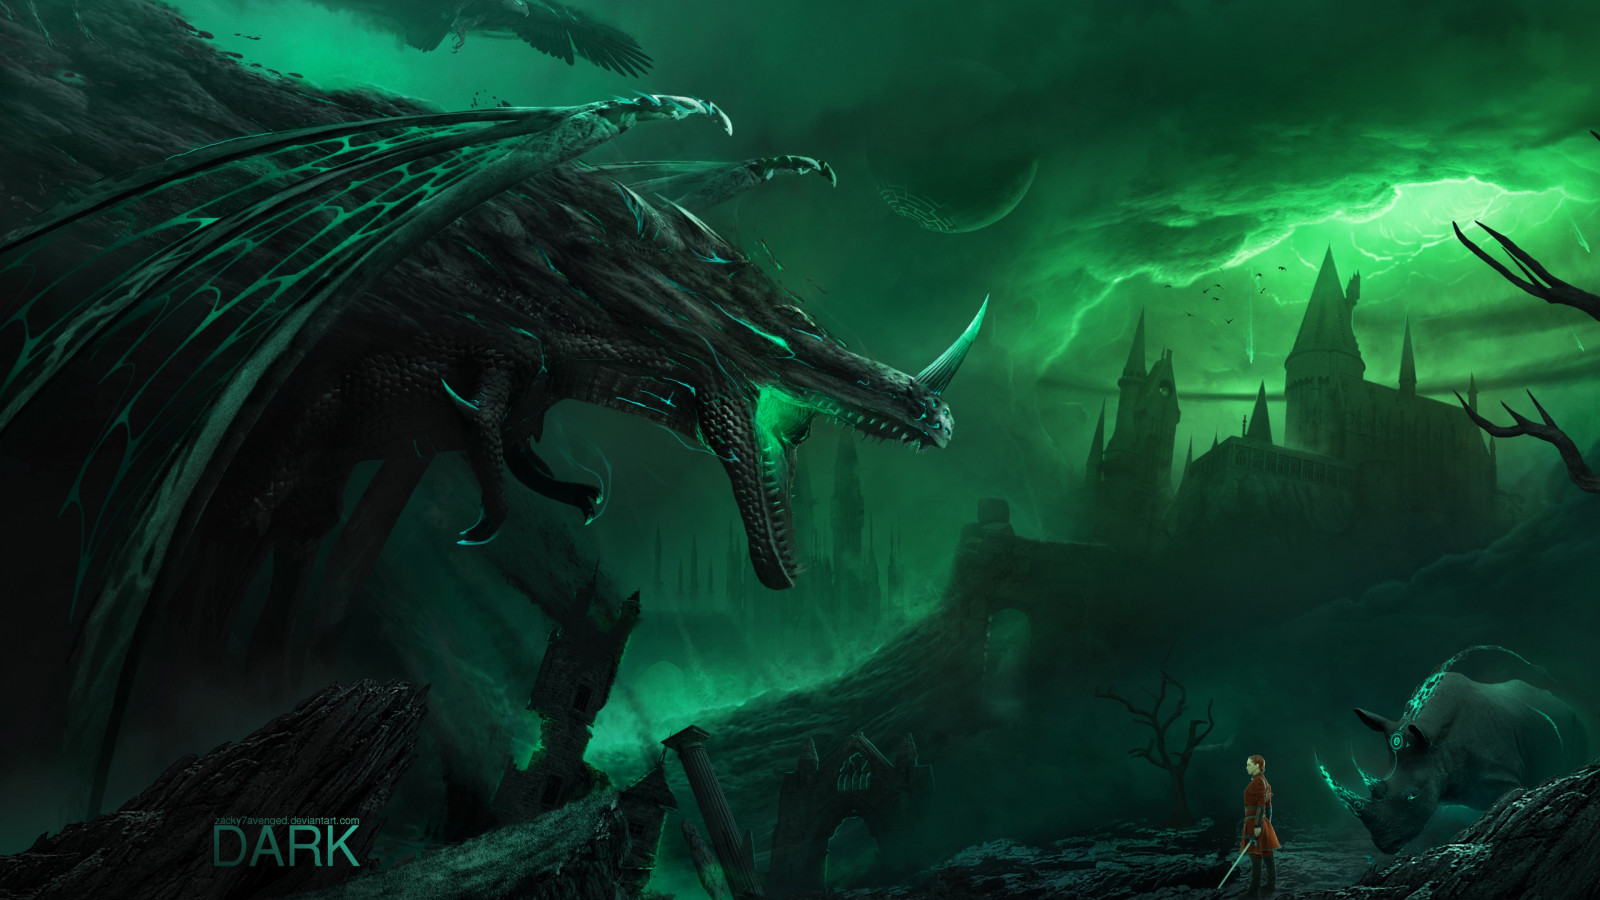 The dark creatures are coming wallpaper 1600x900